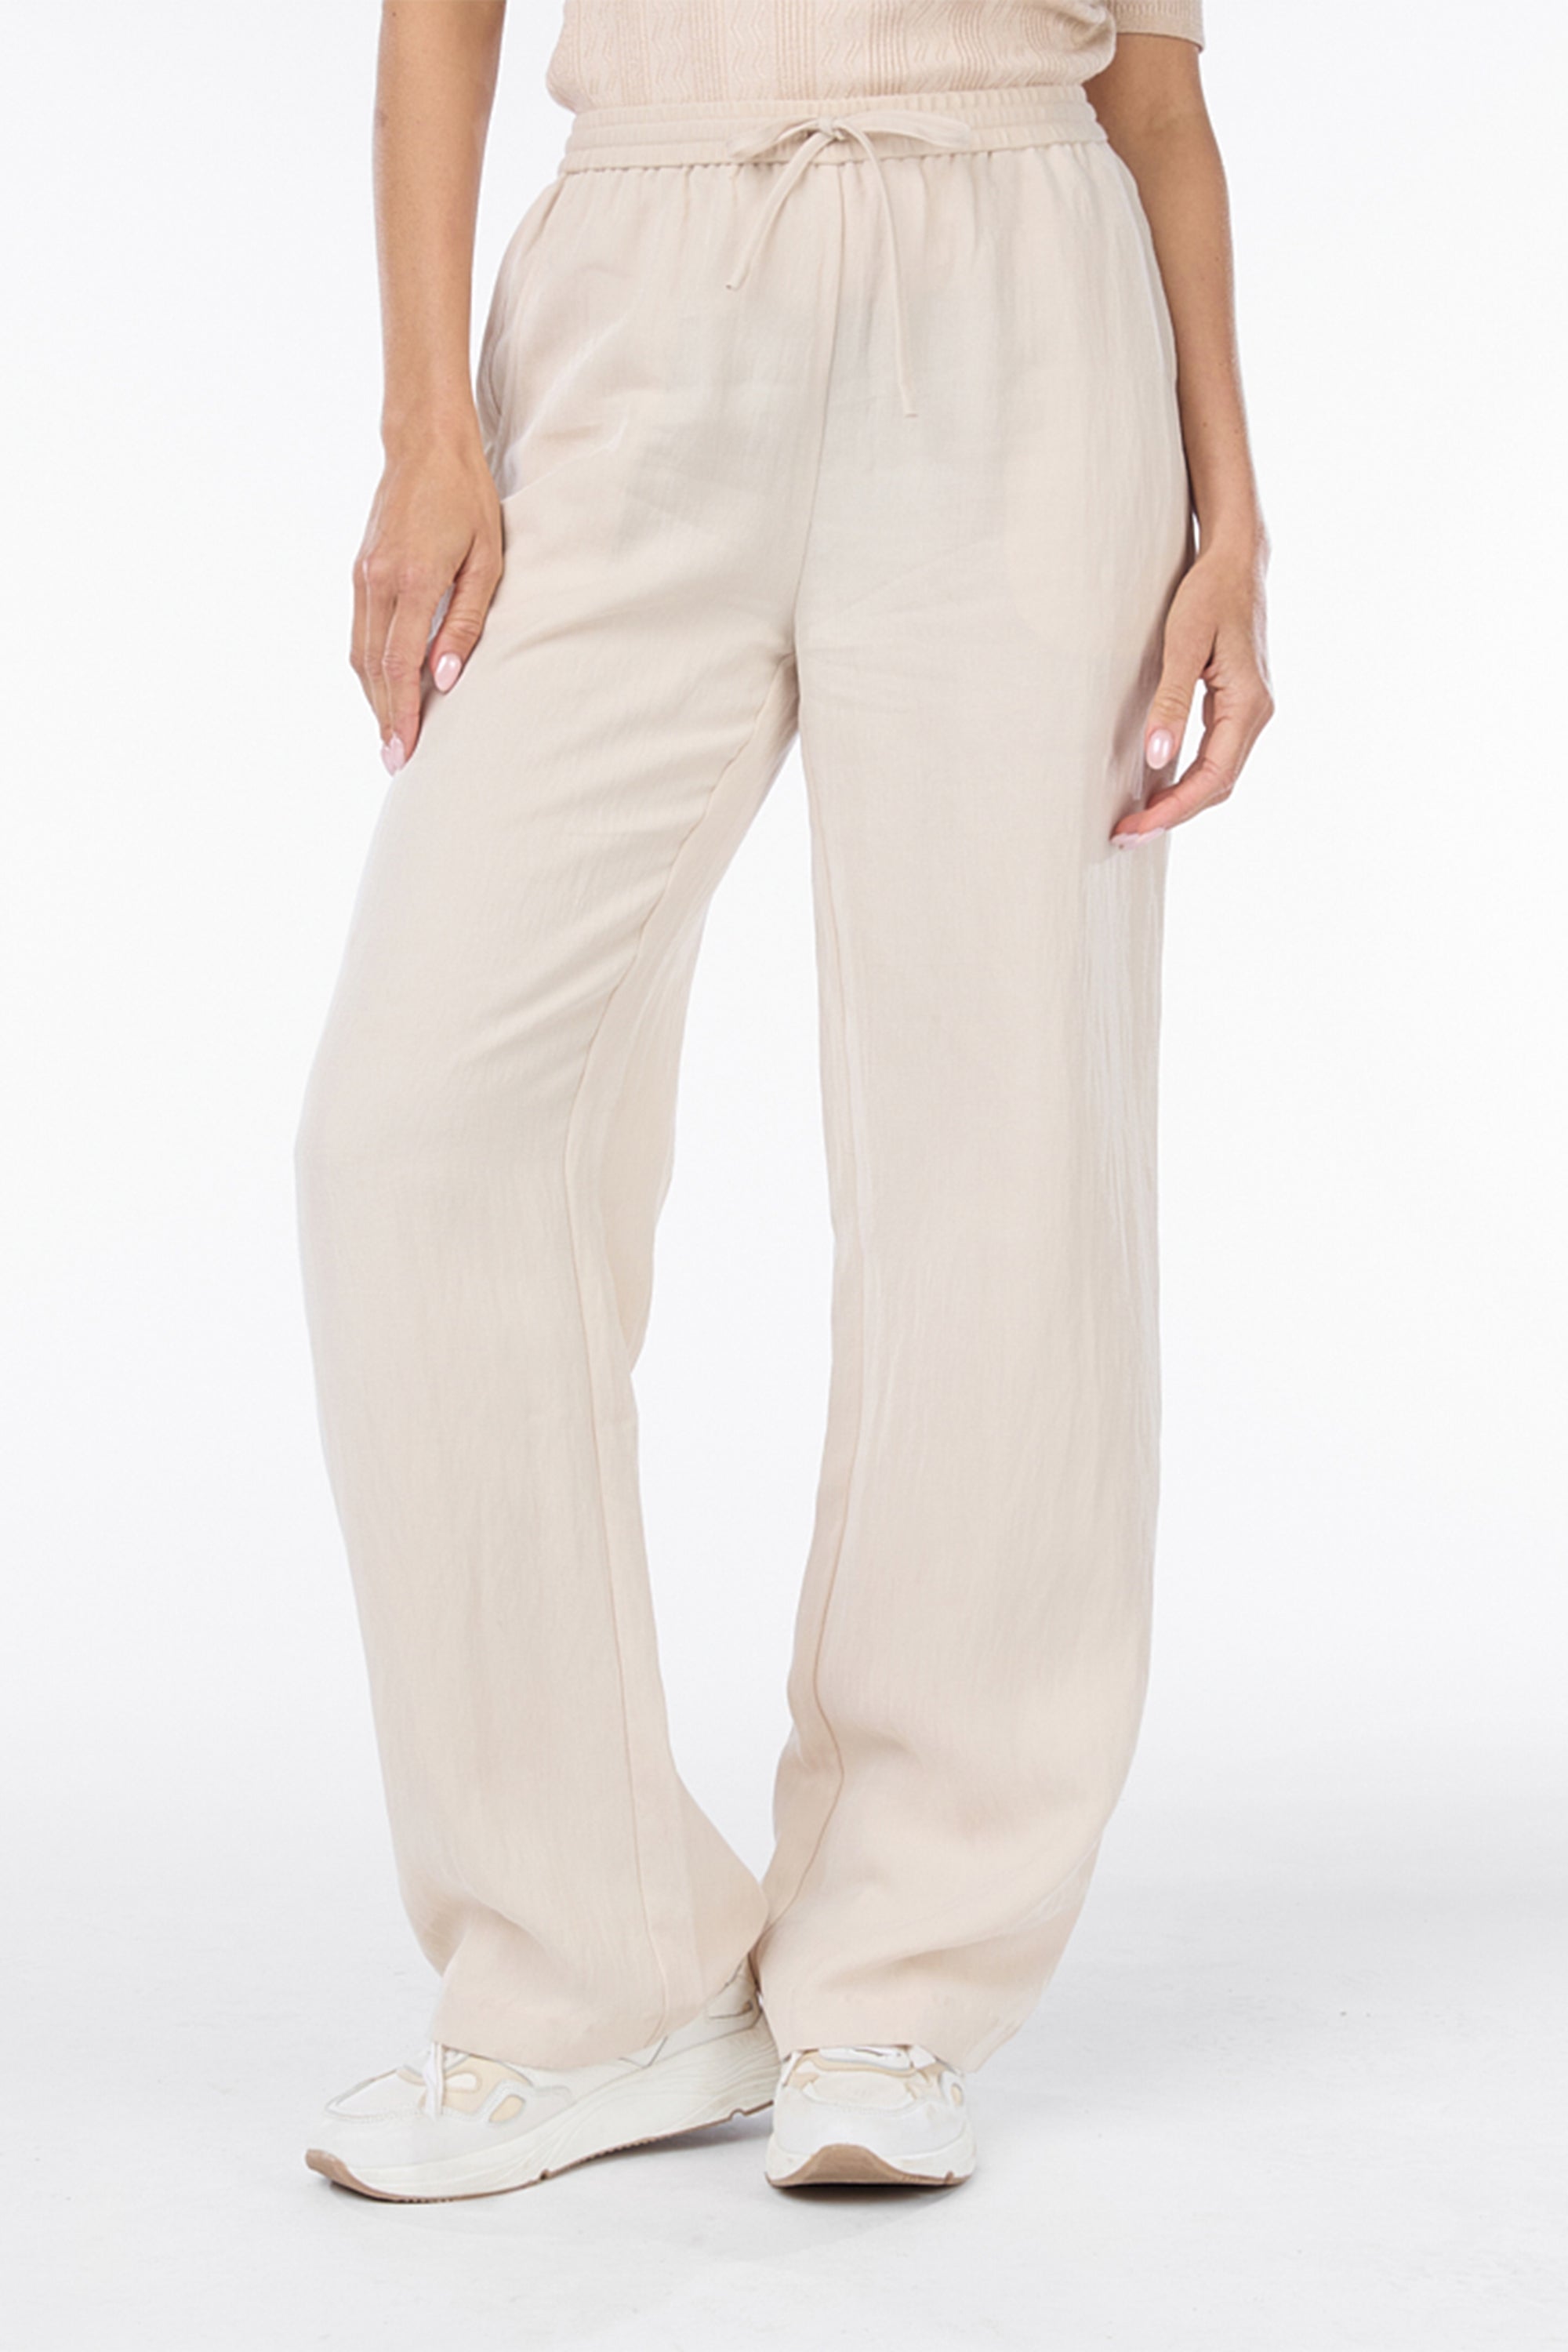 Front view of Esqualo (SP2410017) Women's Pull On High Rise Wide Leg Trousers with Pockets in Sand